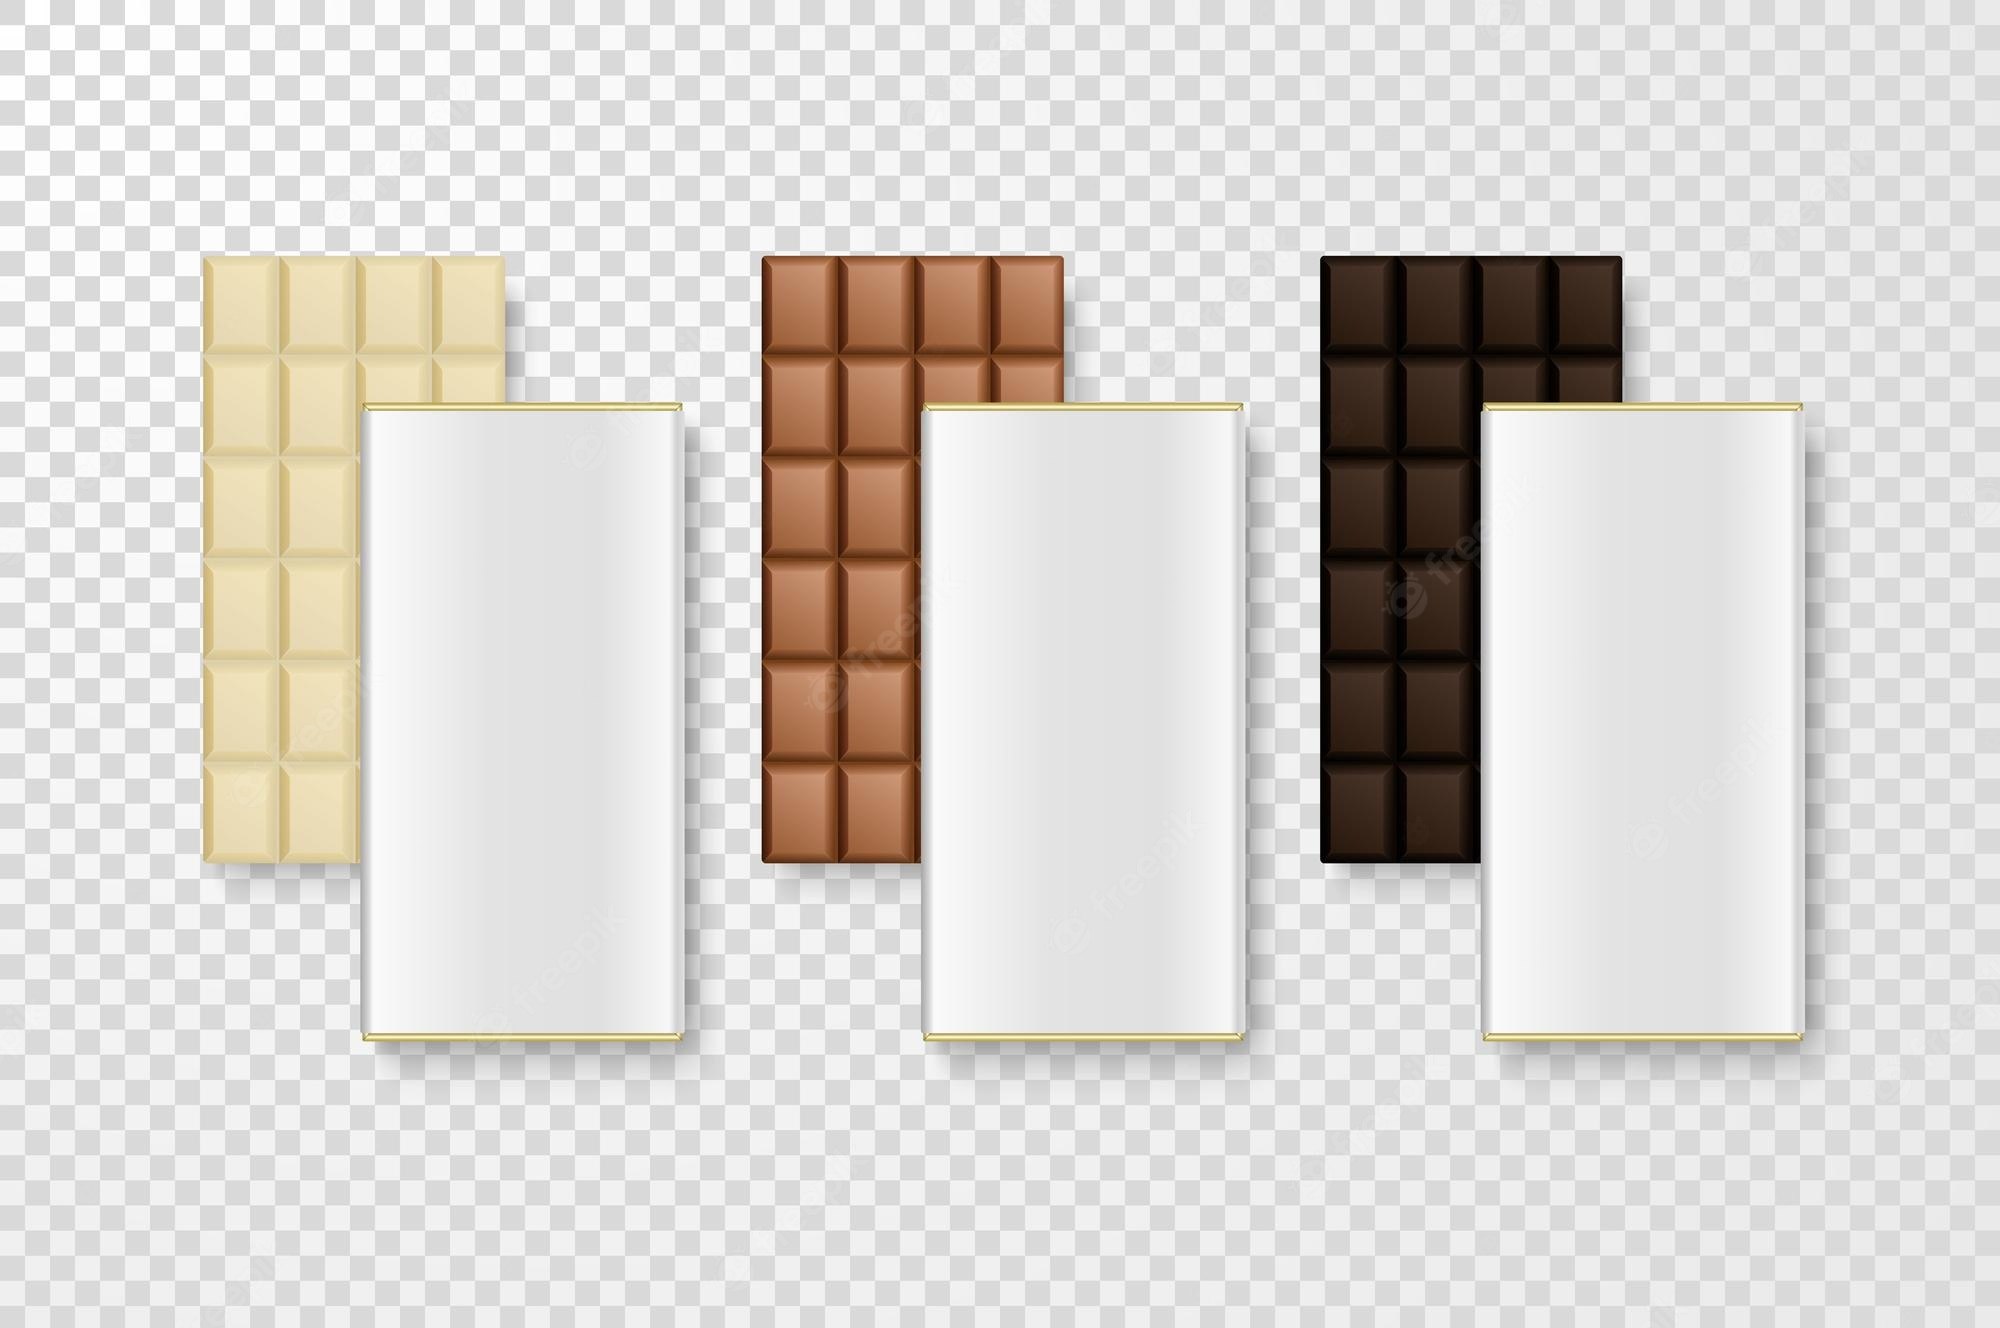 Chocolate bar wrapper Vectors & Illustrations for Free Download